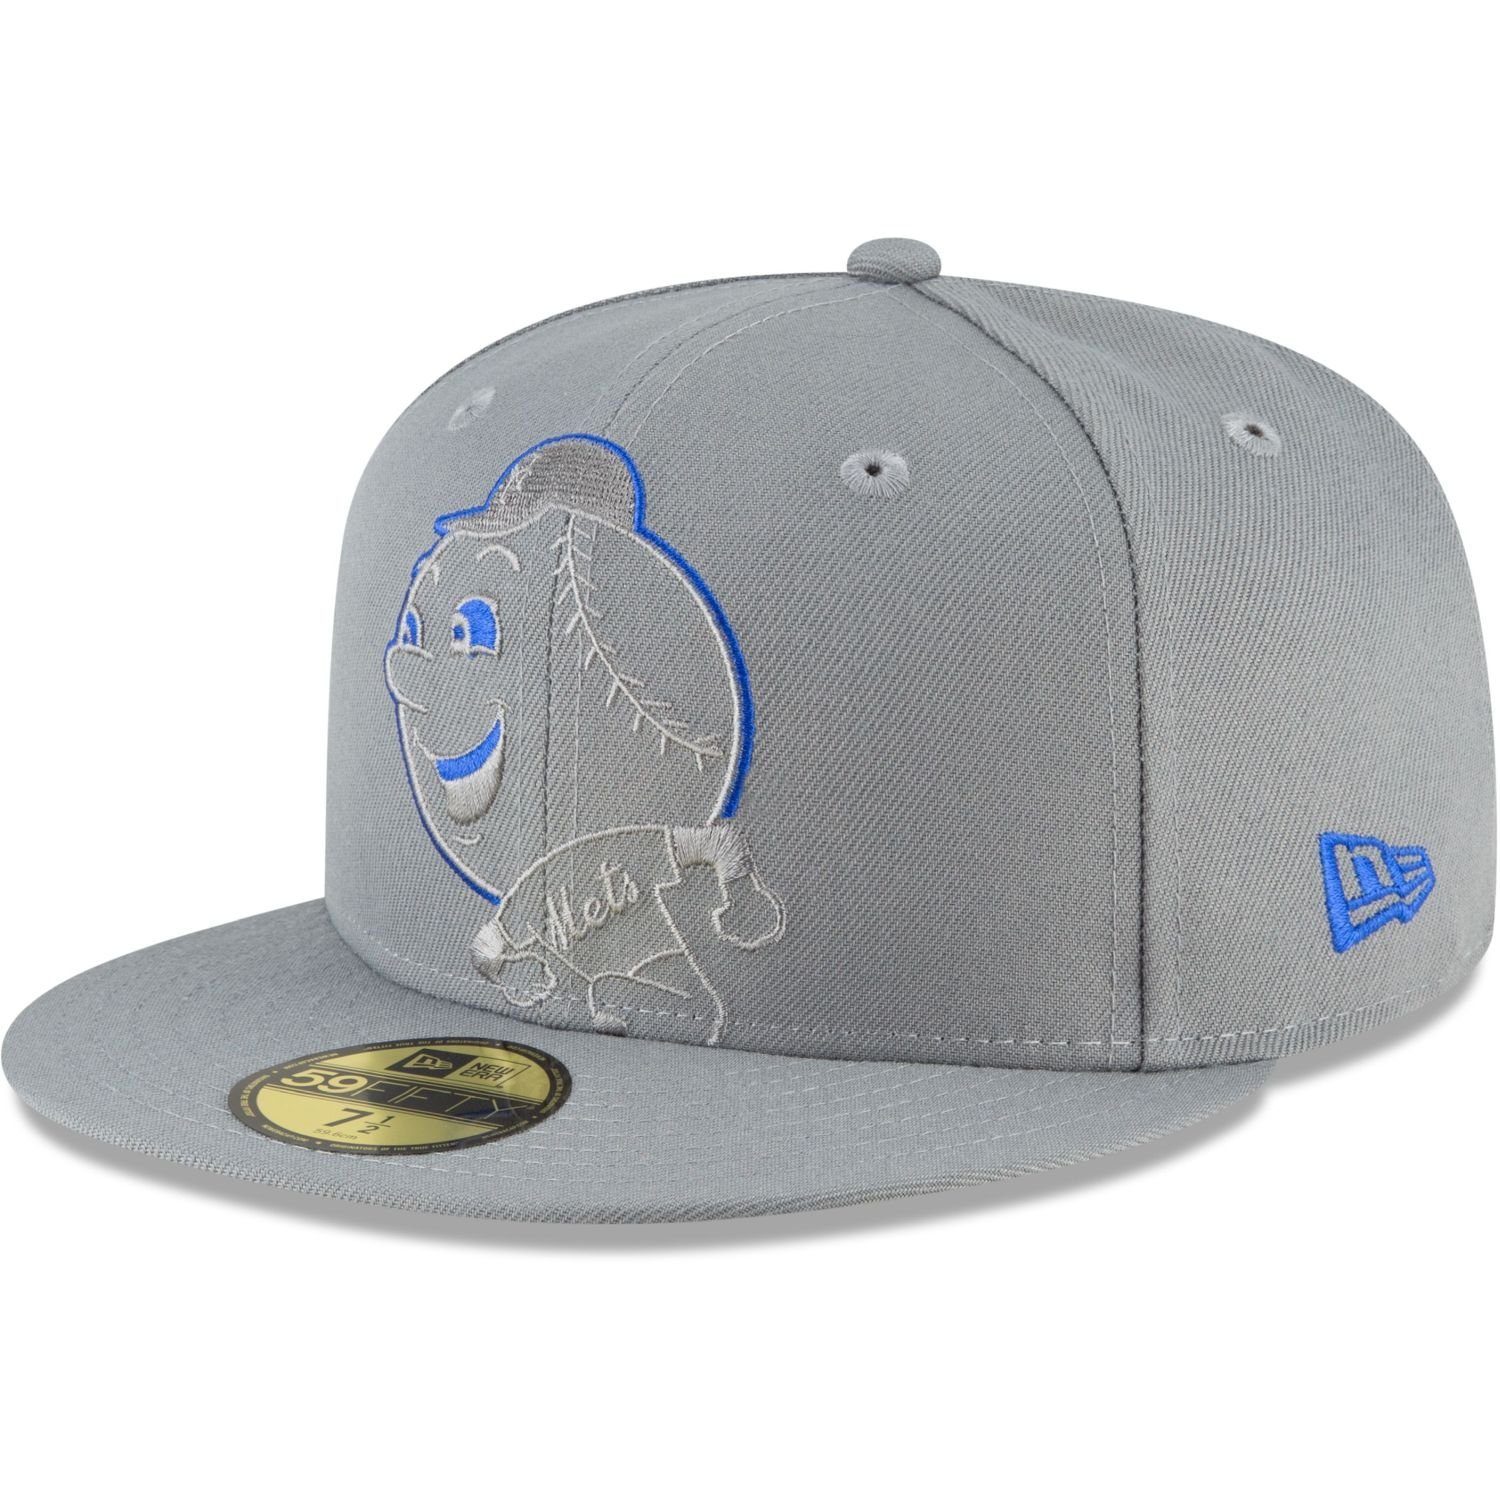 New Era Fitted Cap 59Fifty STORM GREY MLB Cooperstown Team New York Mets